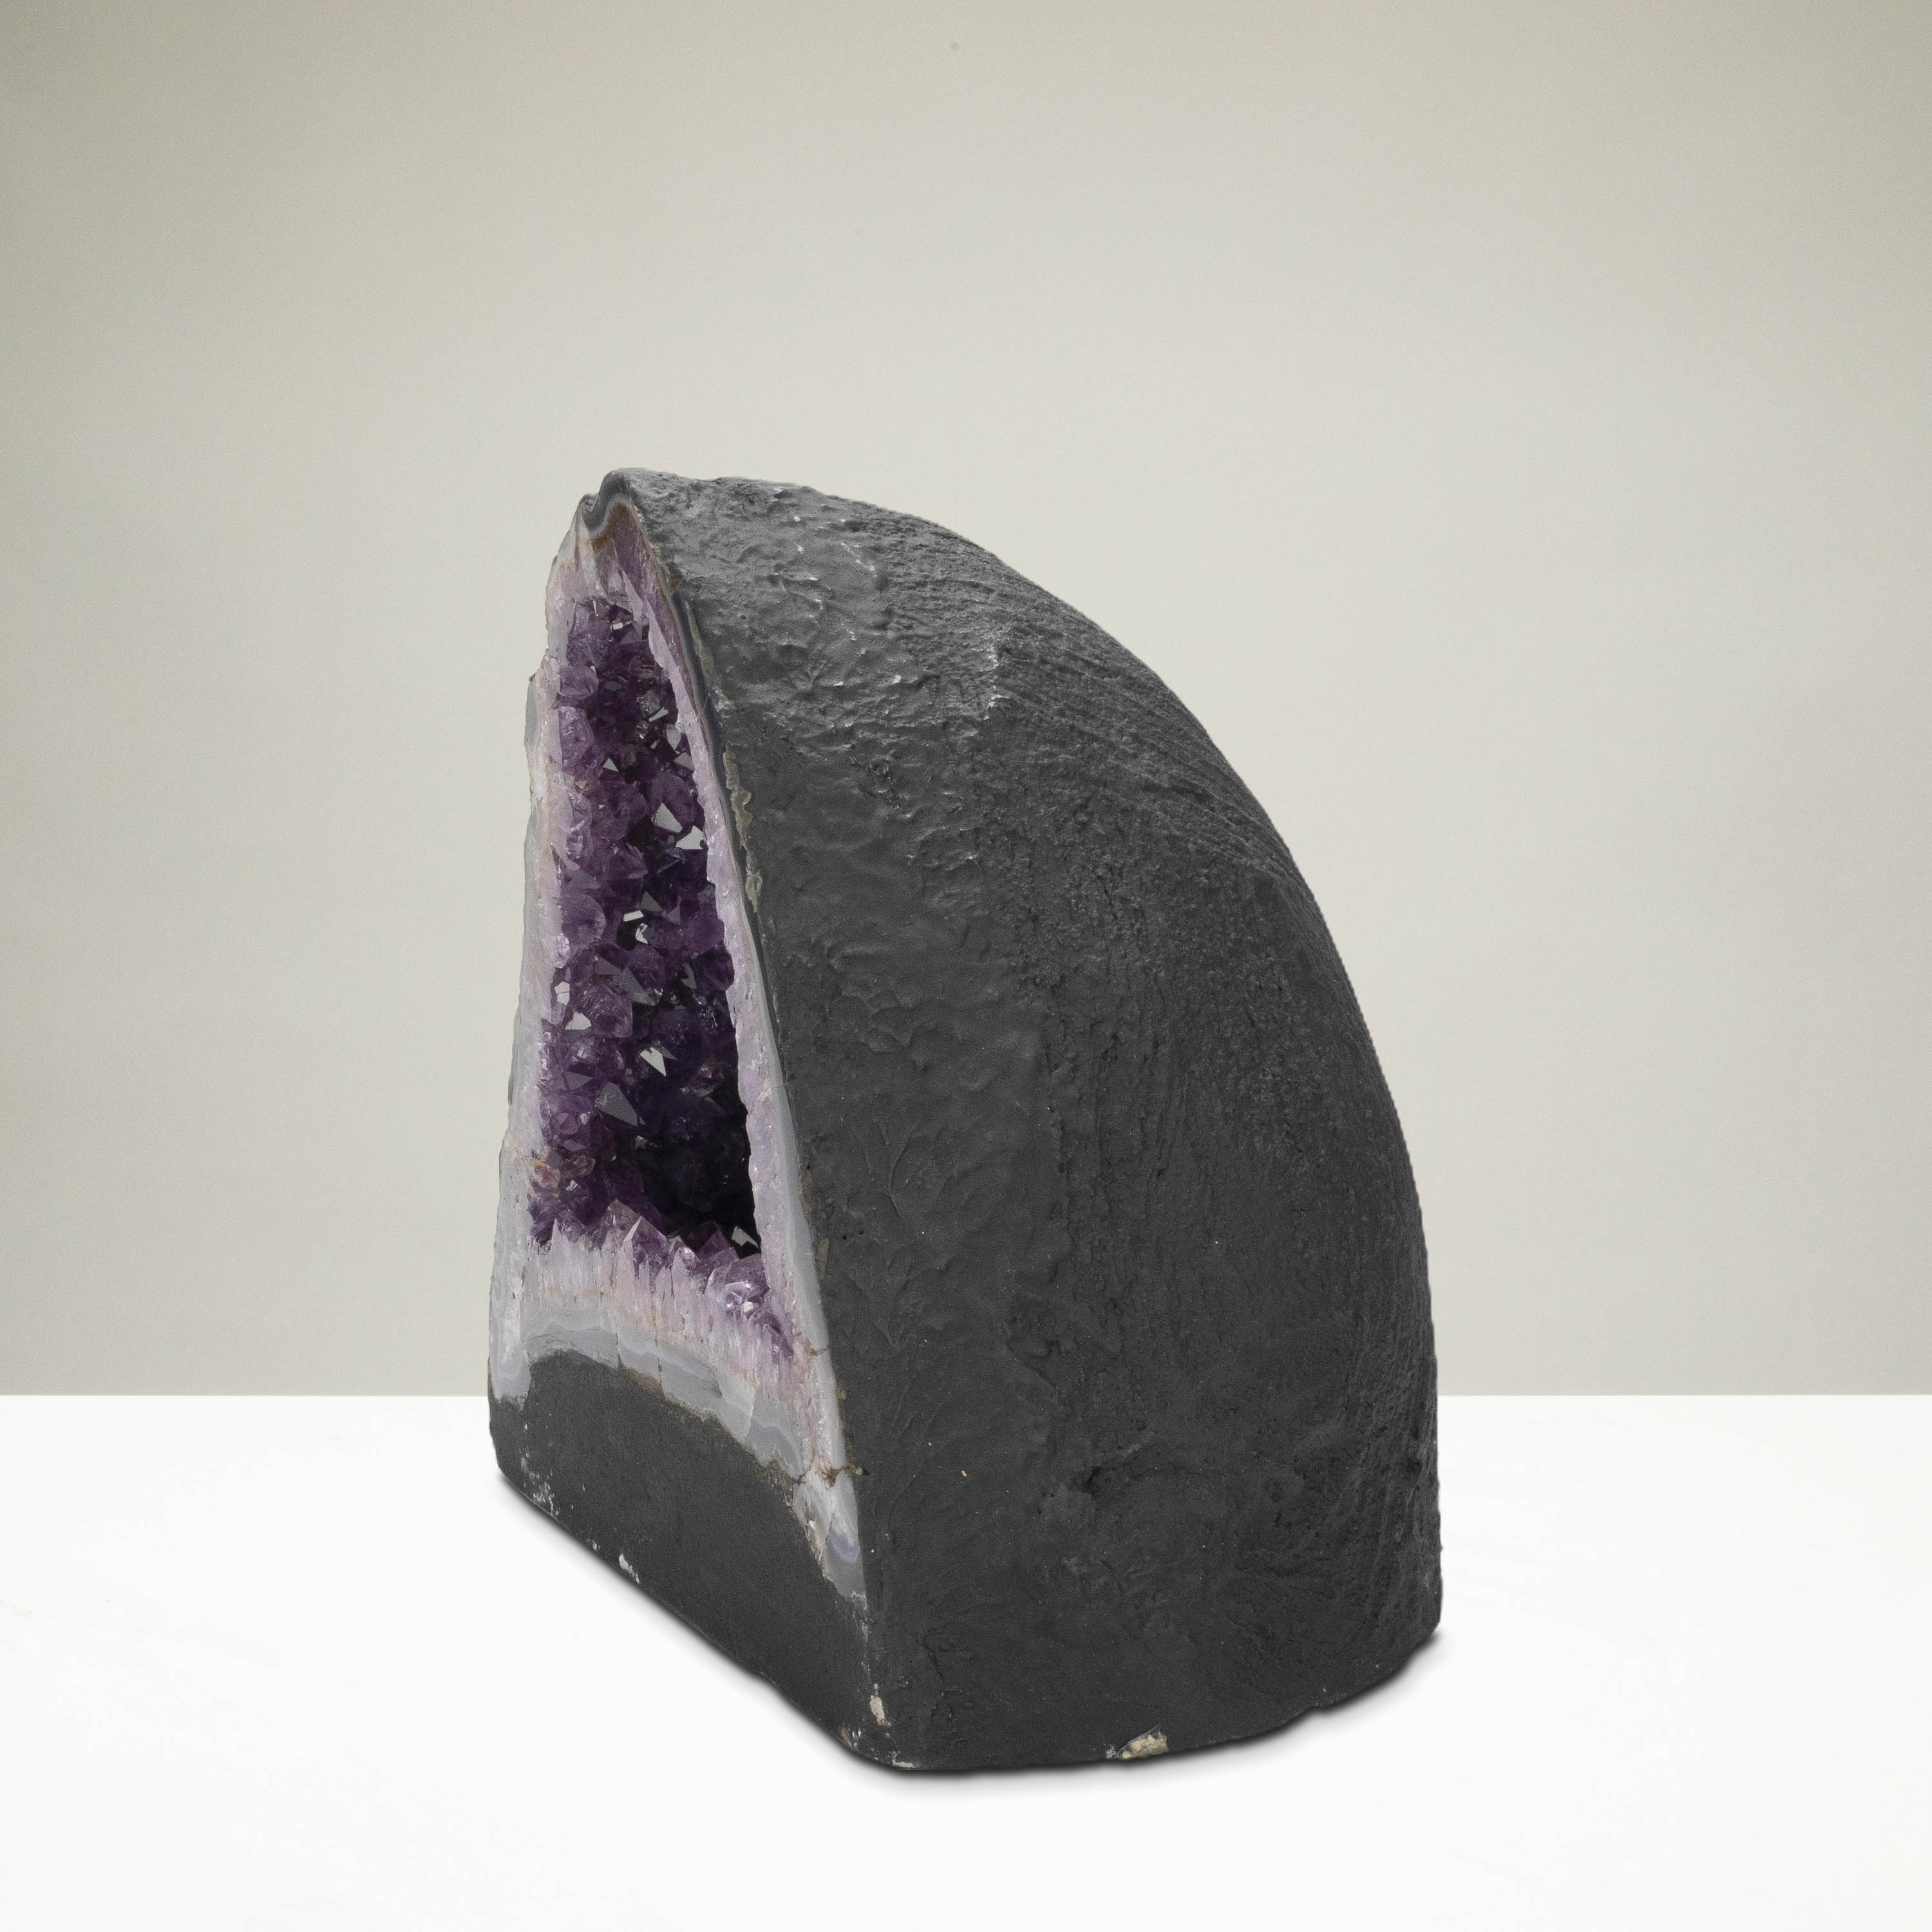 Kalifano Amethyst Amethyst Geode Cathedral - 12" / 44 lbs BAG6400.003